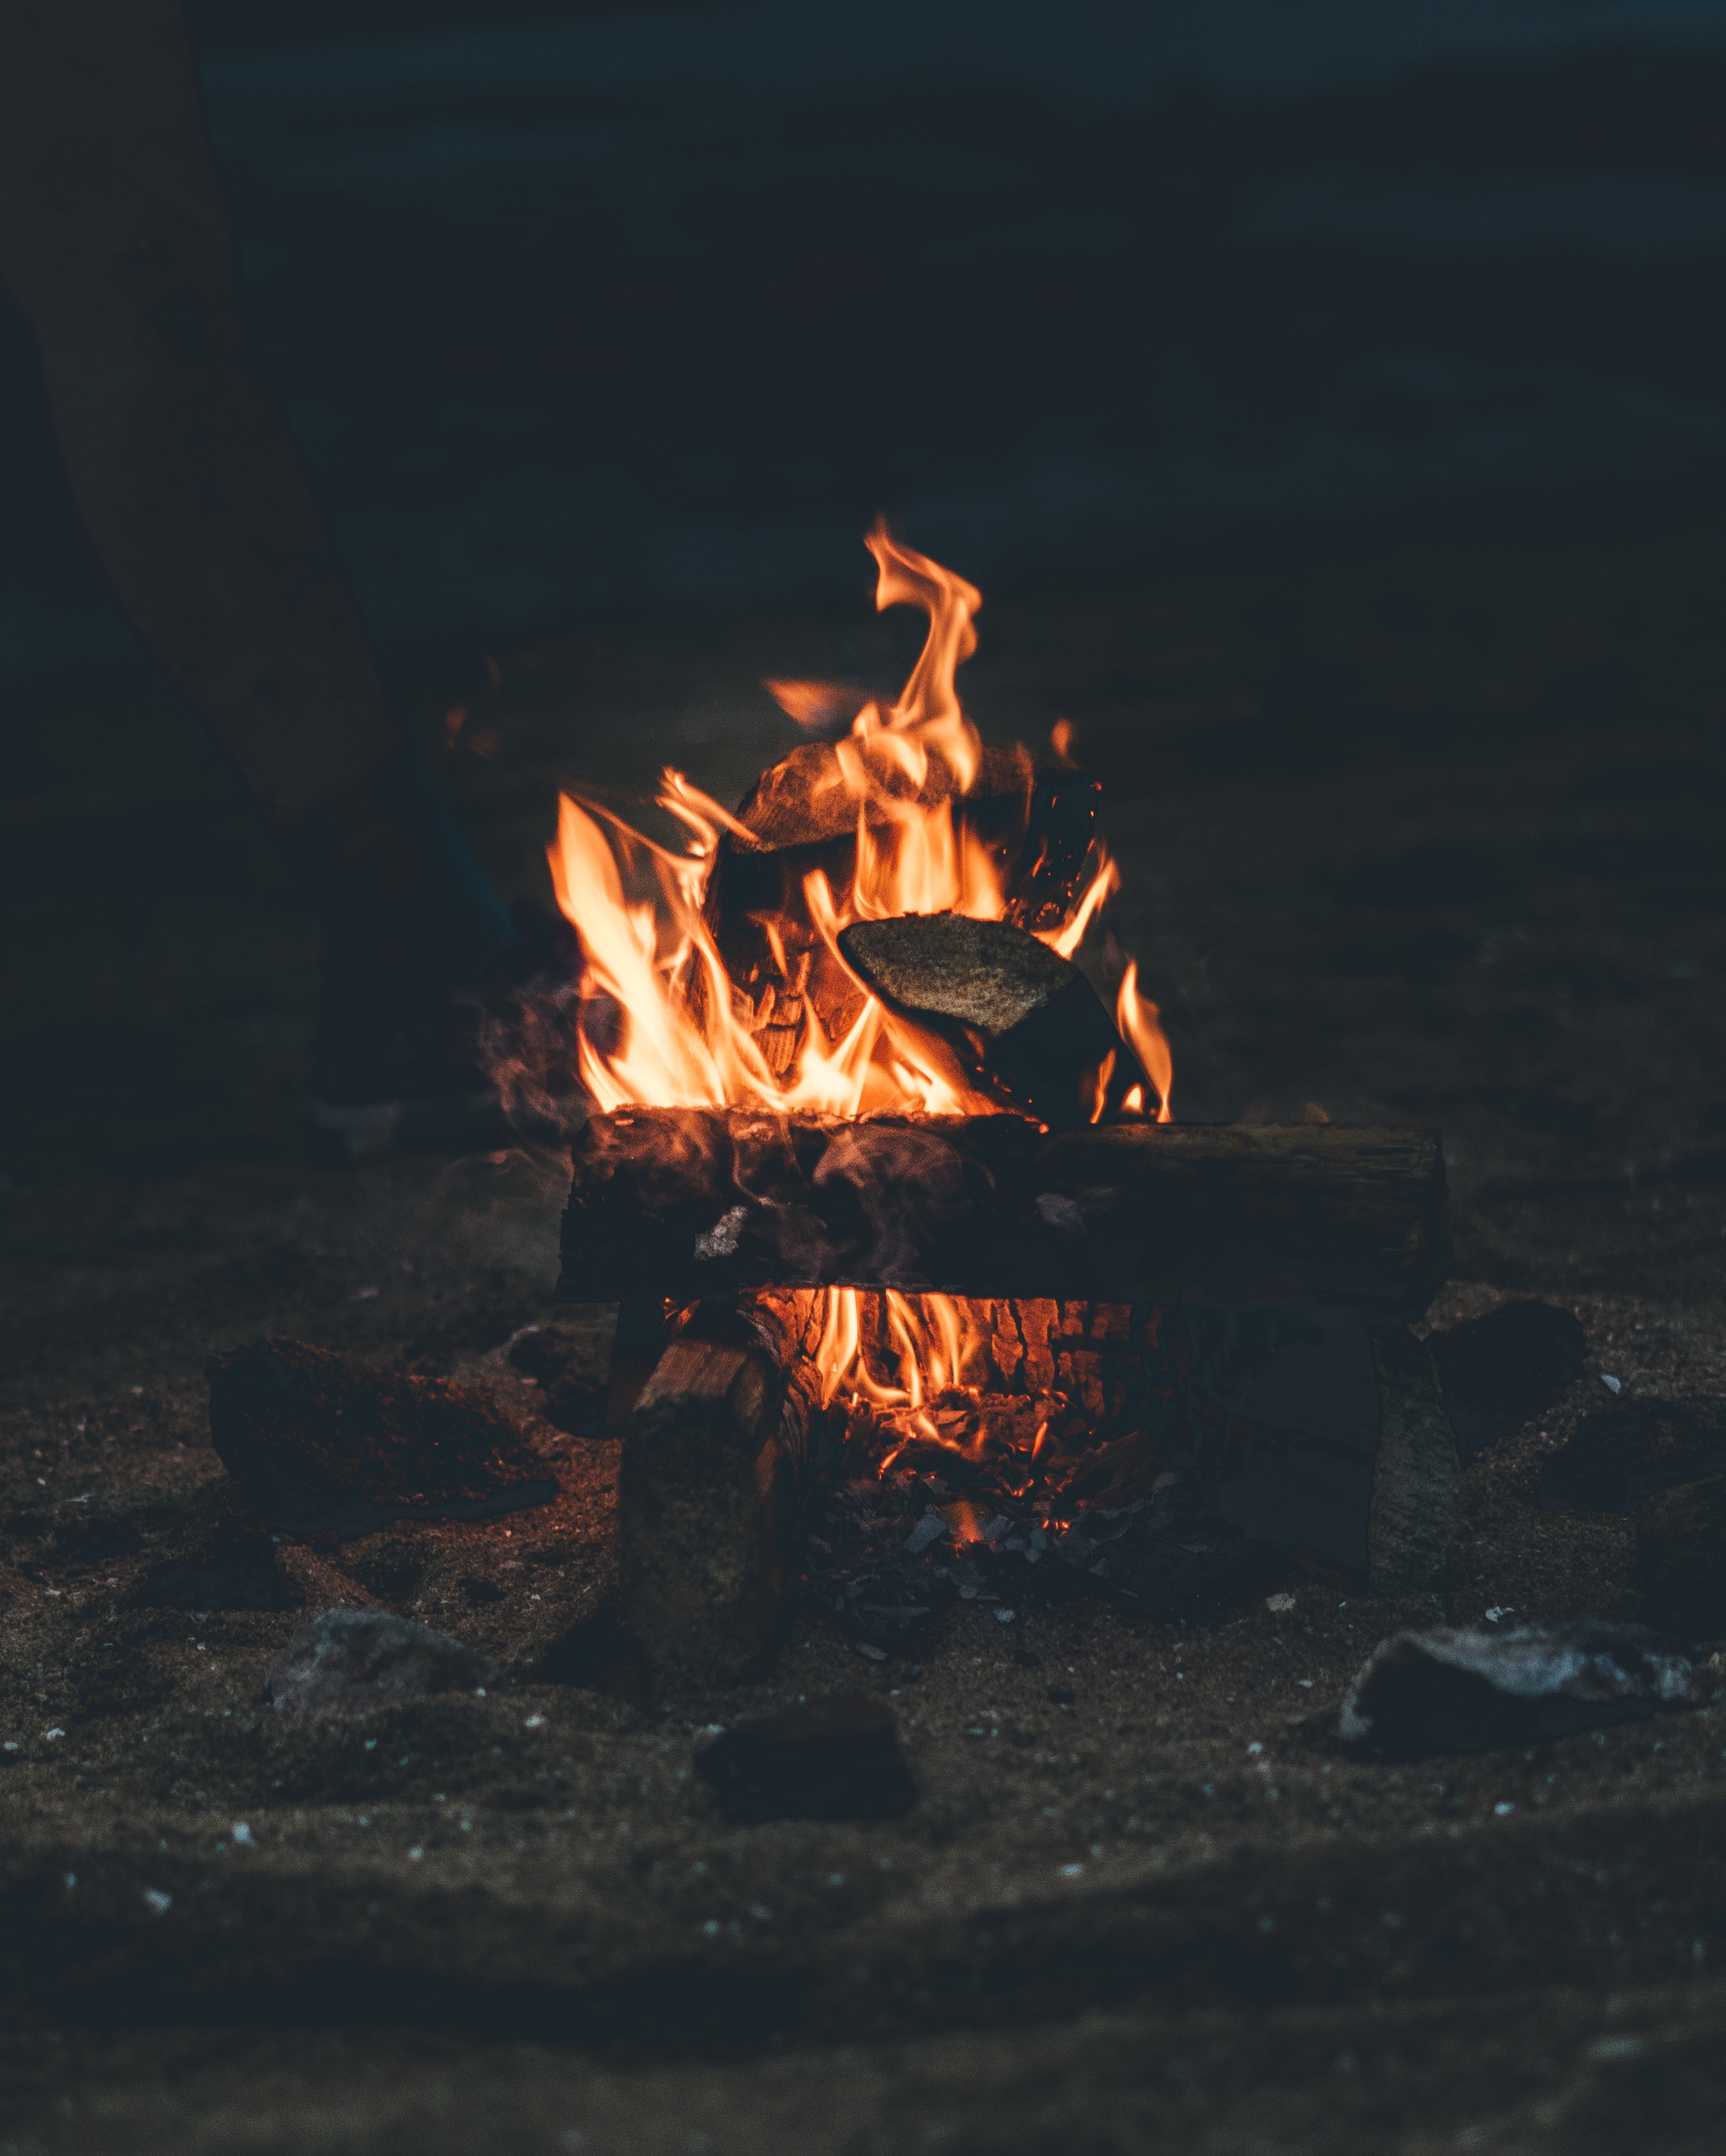 88287 download wallpaper fire, bonfire, night, miscellanea, miscellaneous, firewood, camping, campsite screensavers and pictures for free